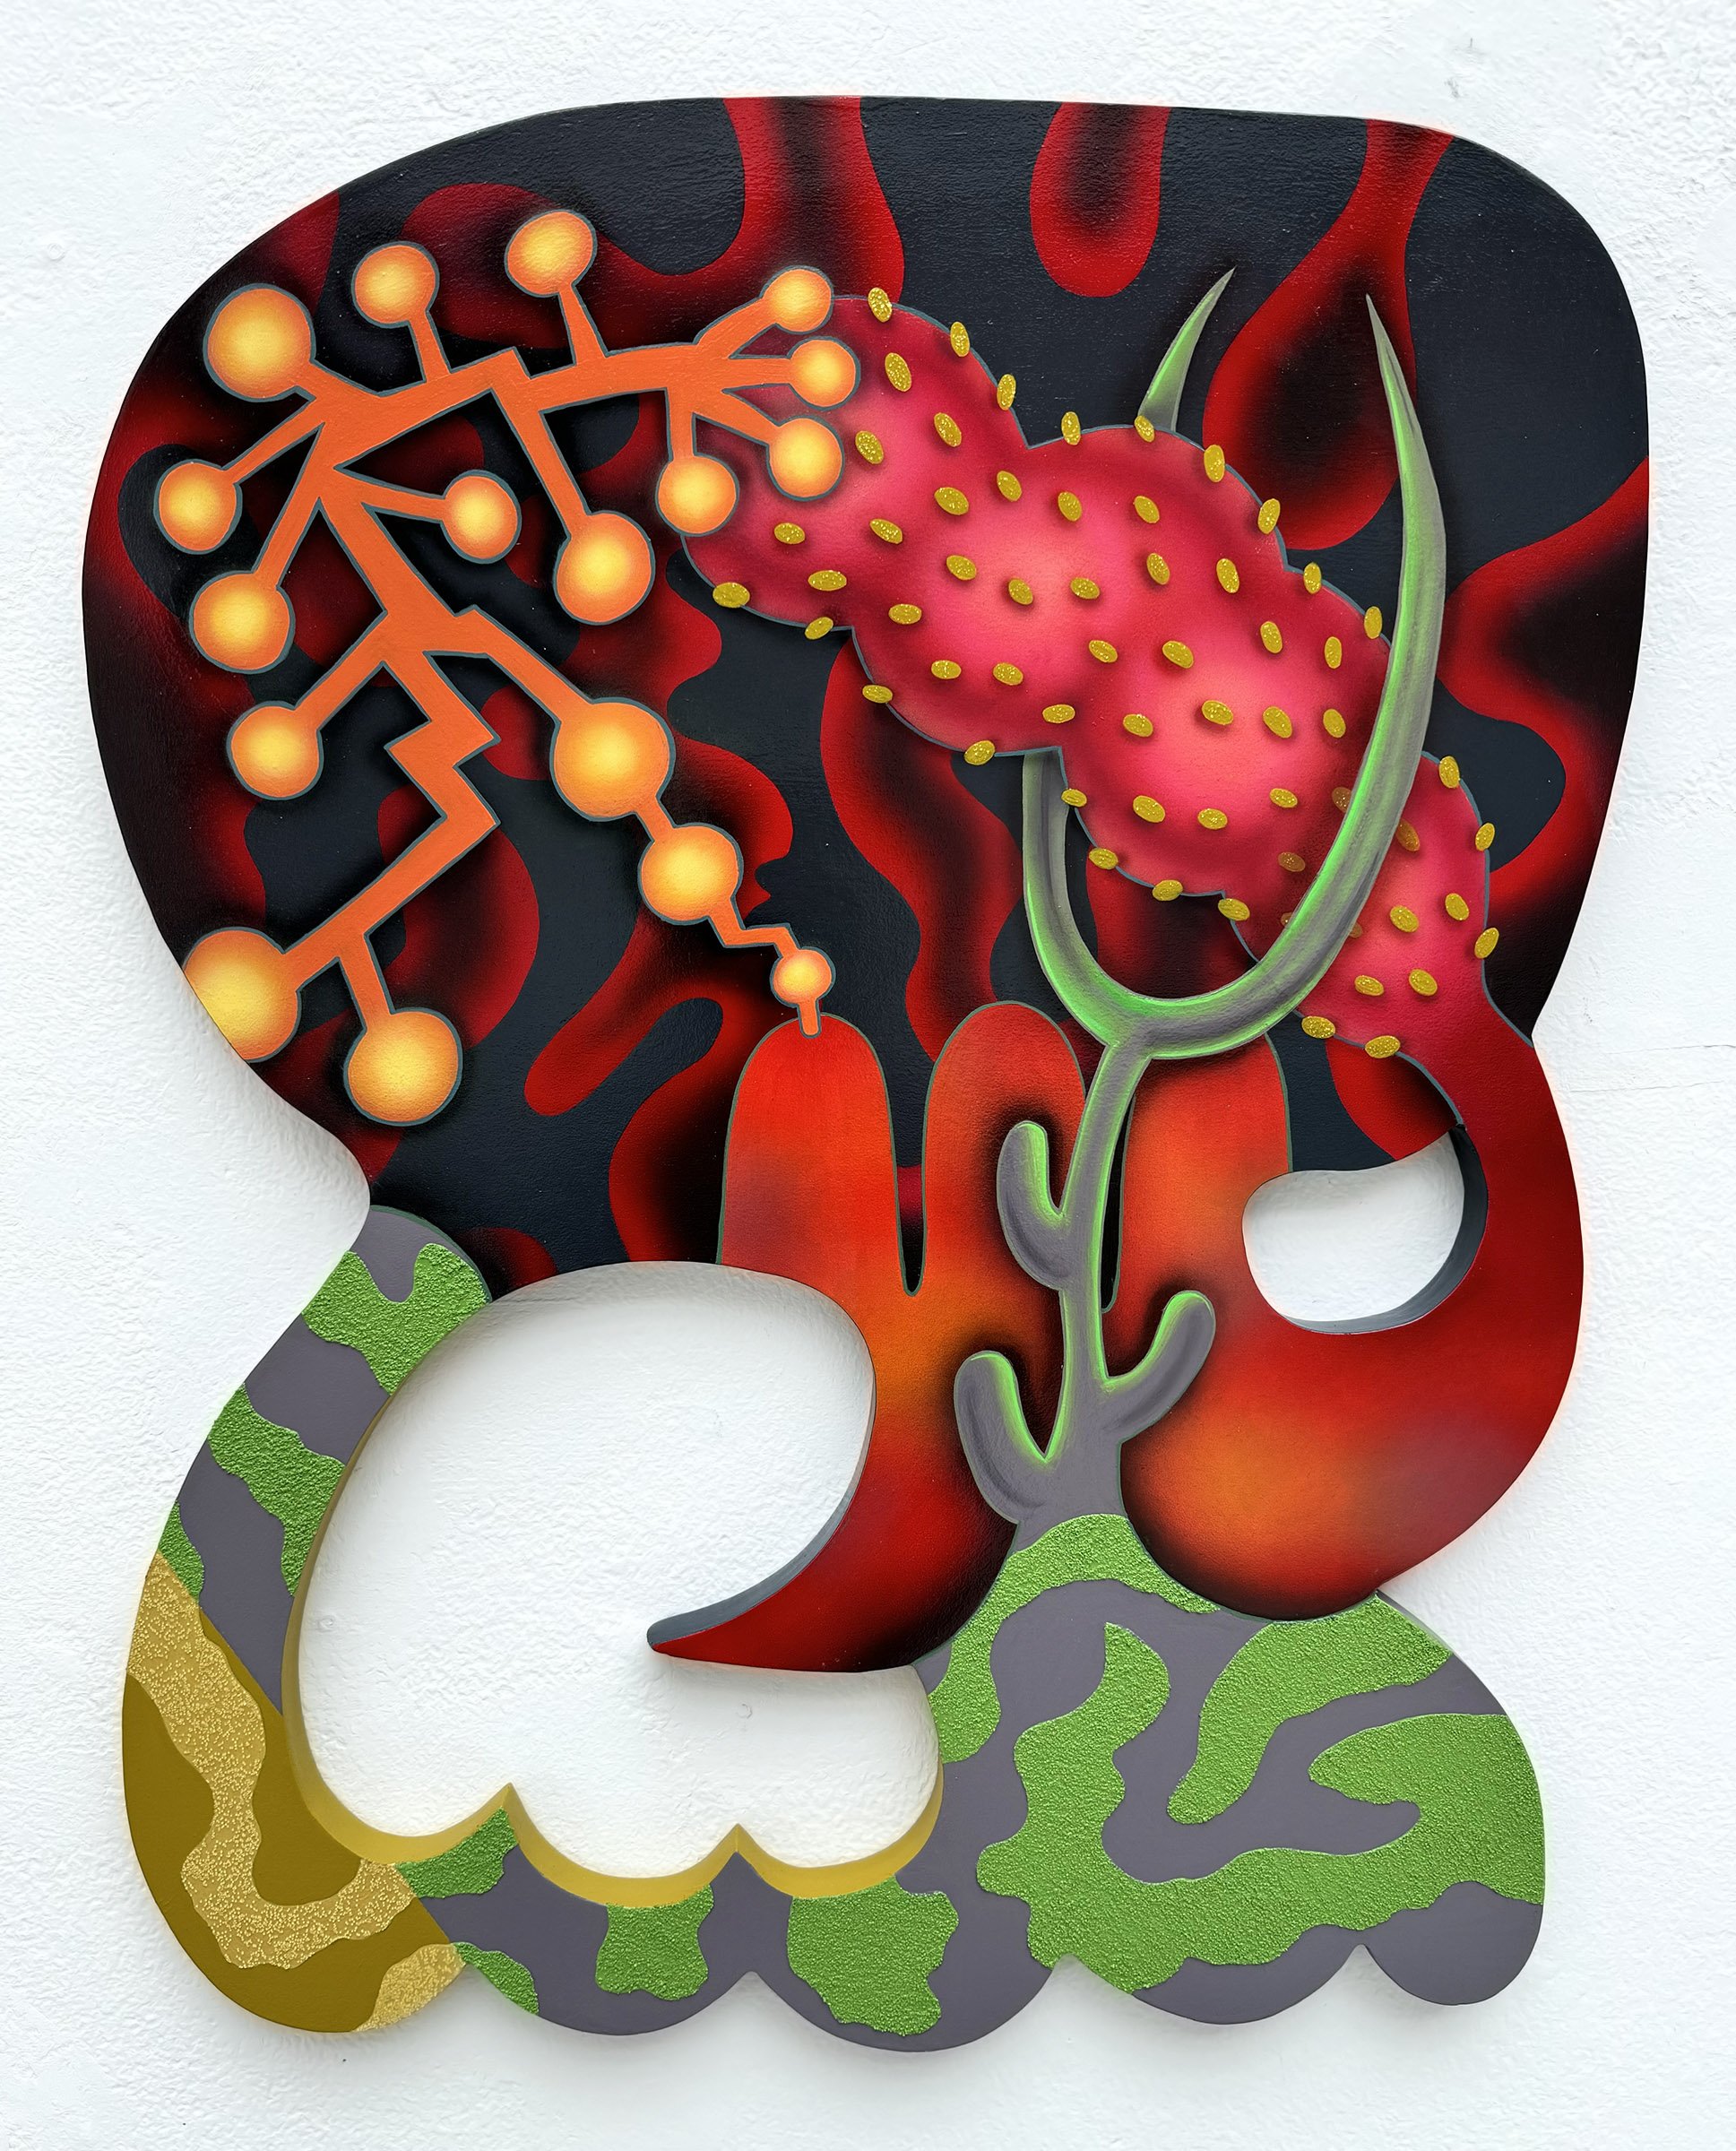 Molecular Intervention, acrylic, pumice and glass beads on custom wood panel, 30 x 25 in., 2023